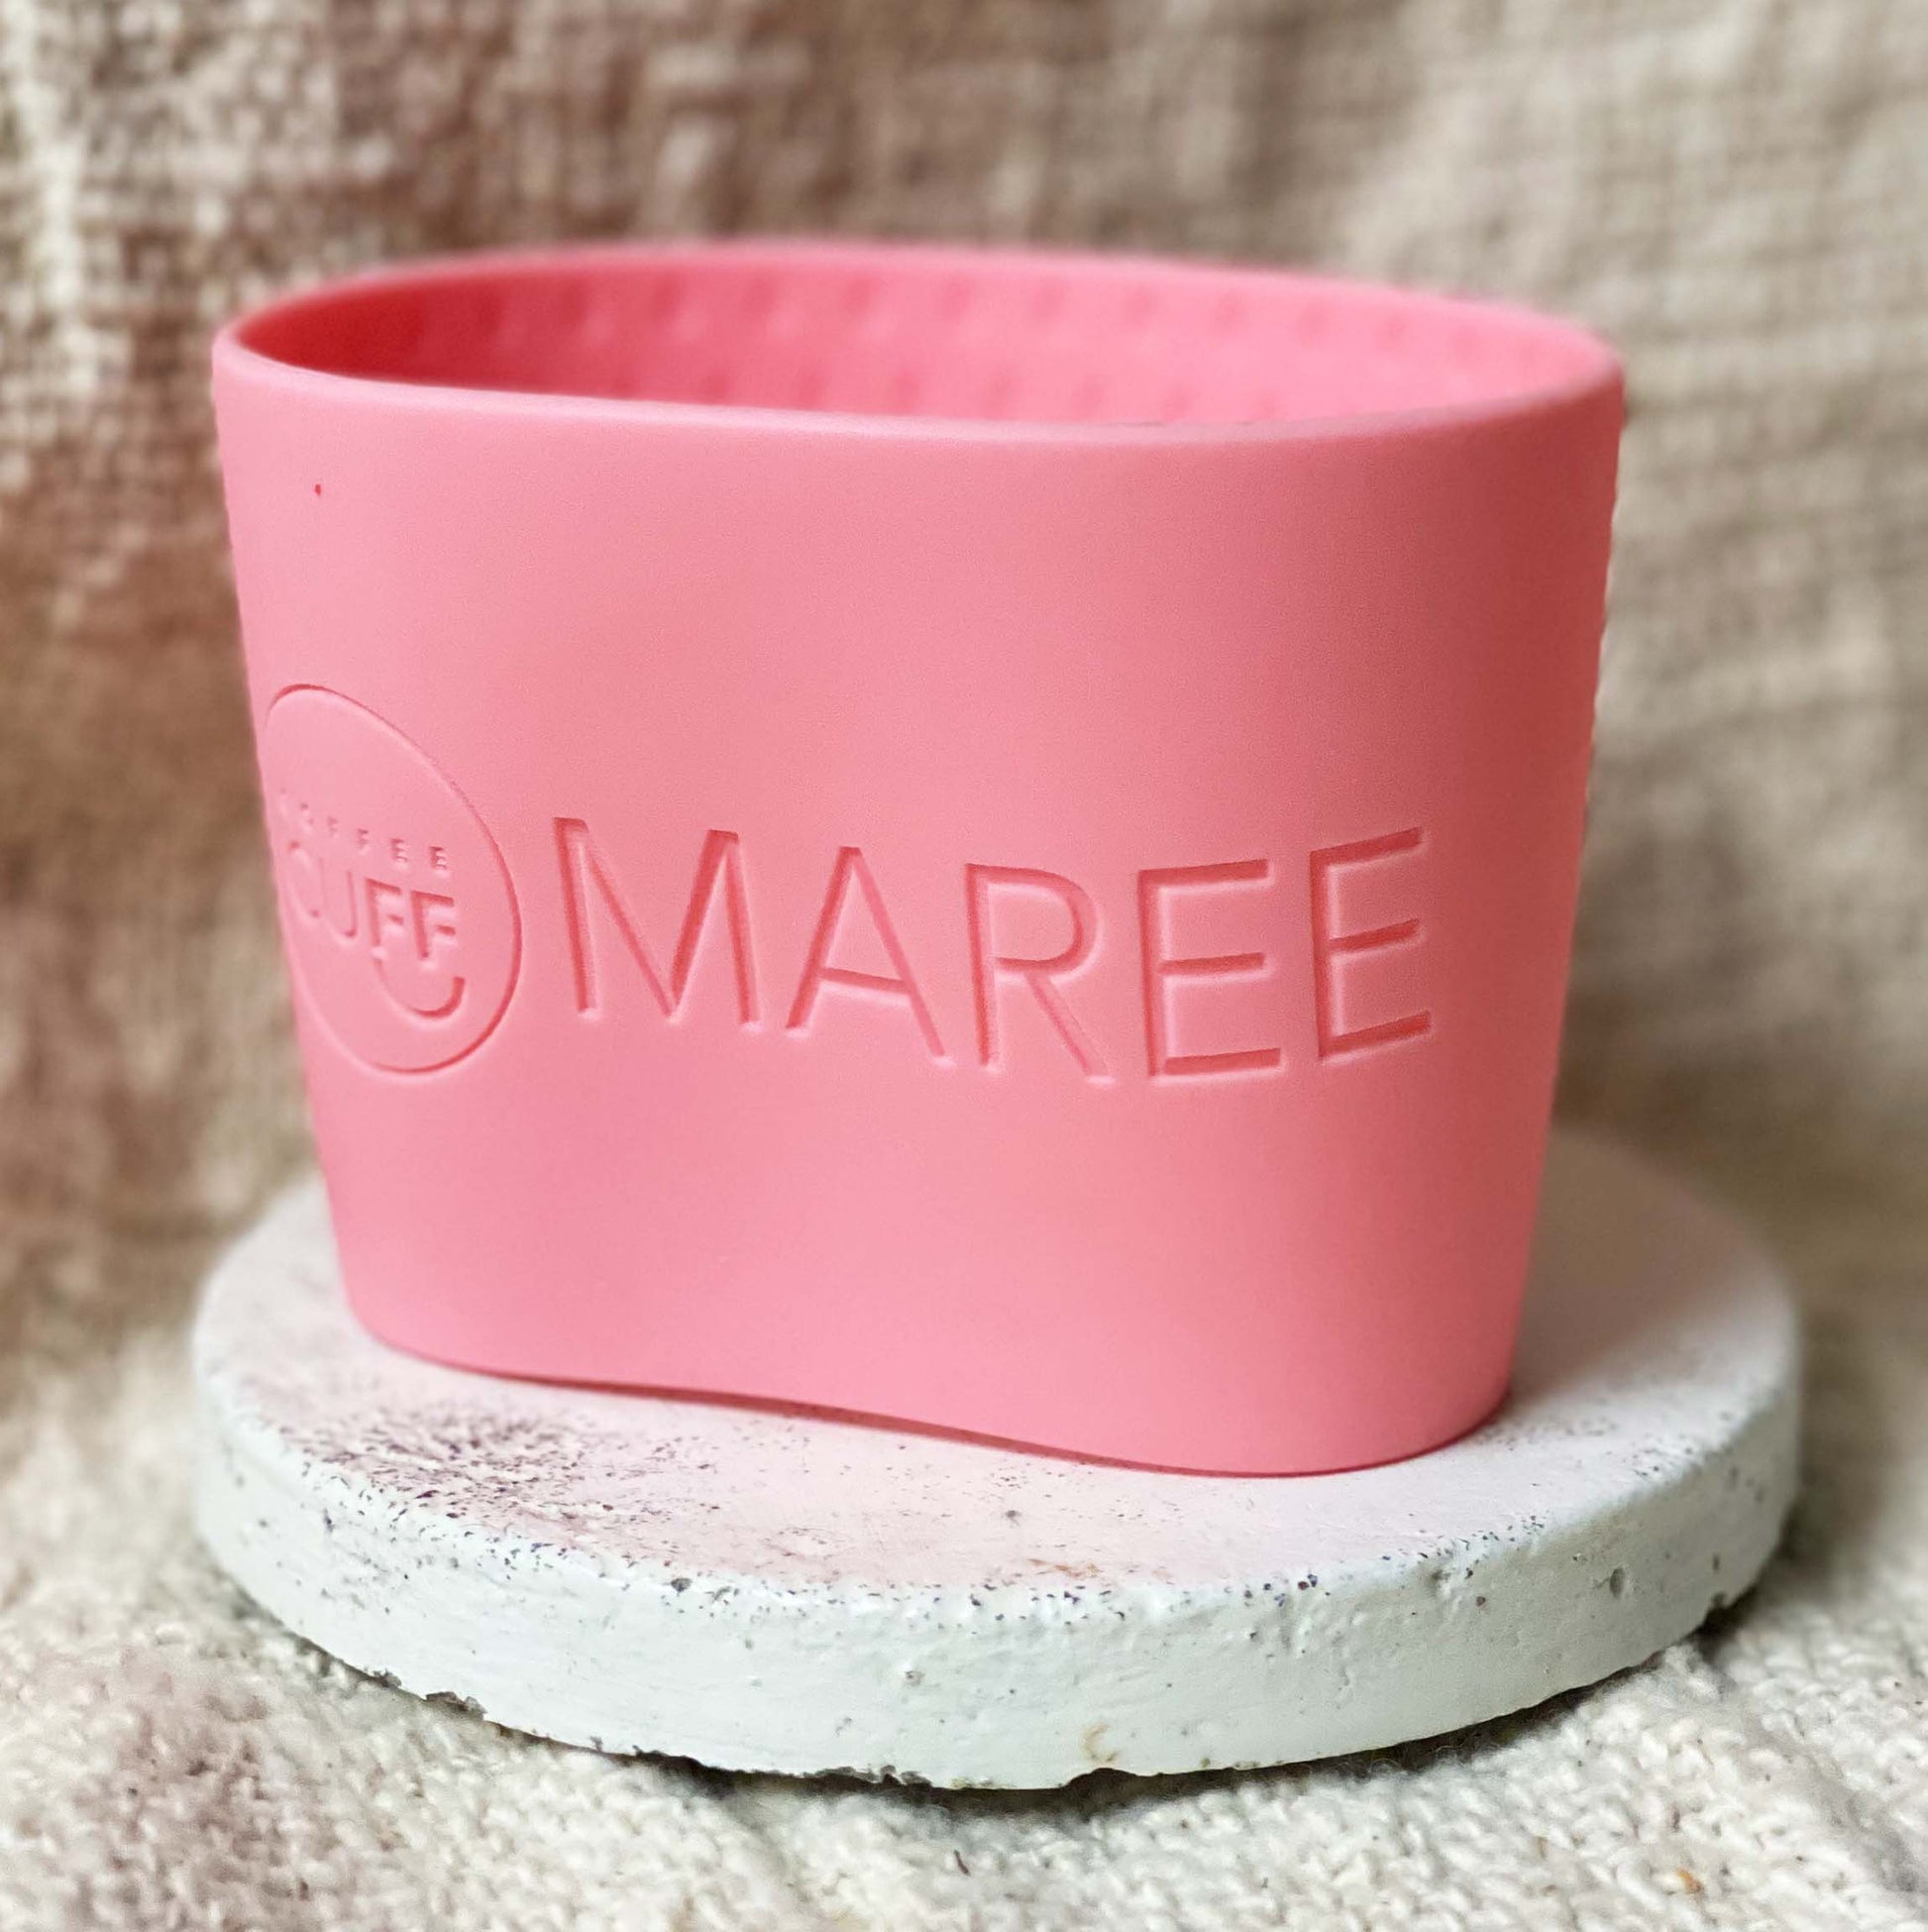 Coffee_Cuff_Large_pink_takeaway_cup_sleeve with name Maree